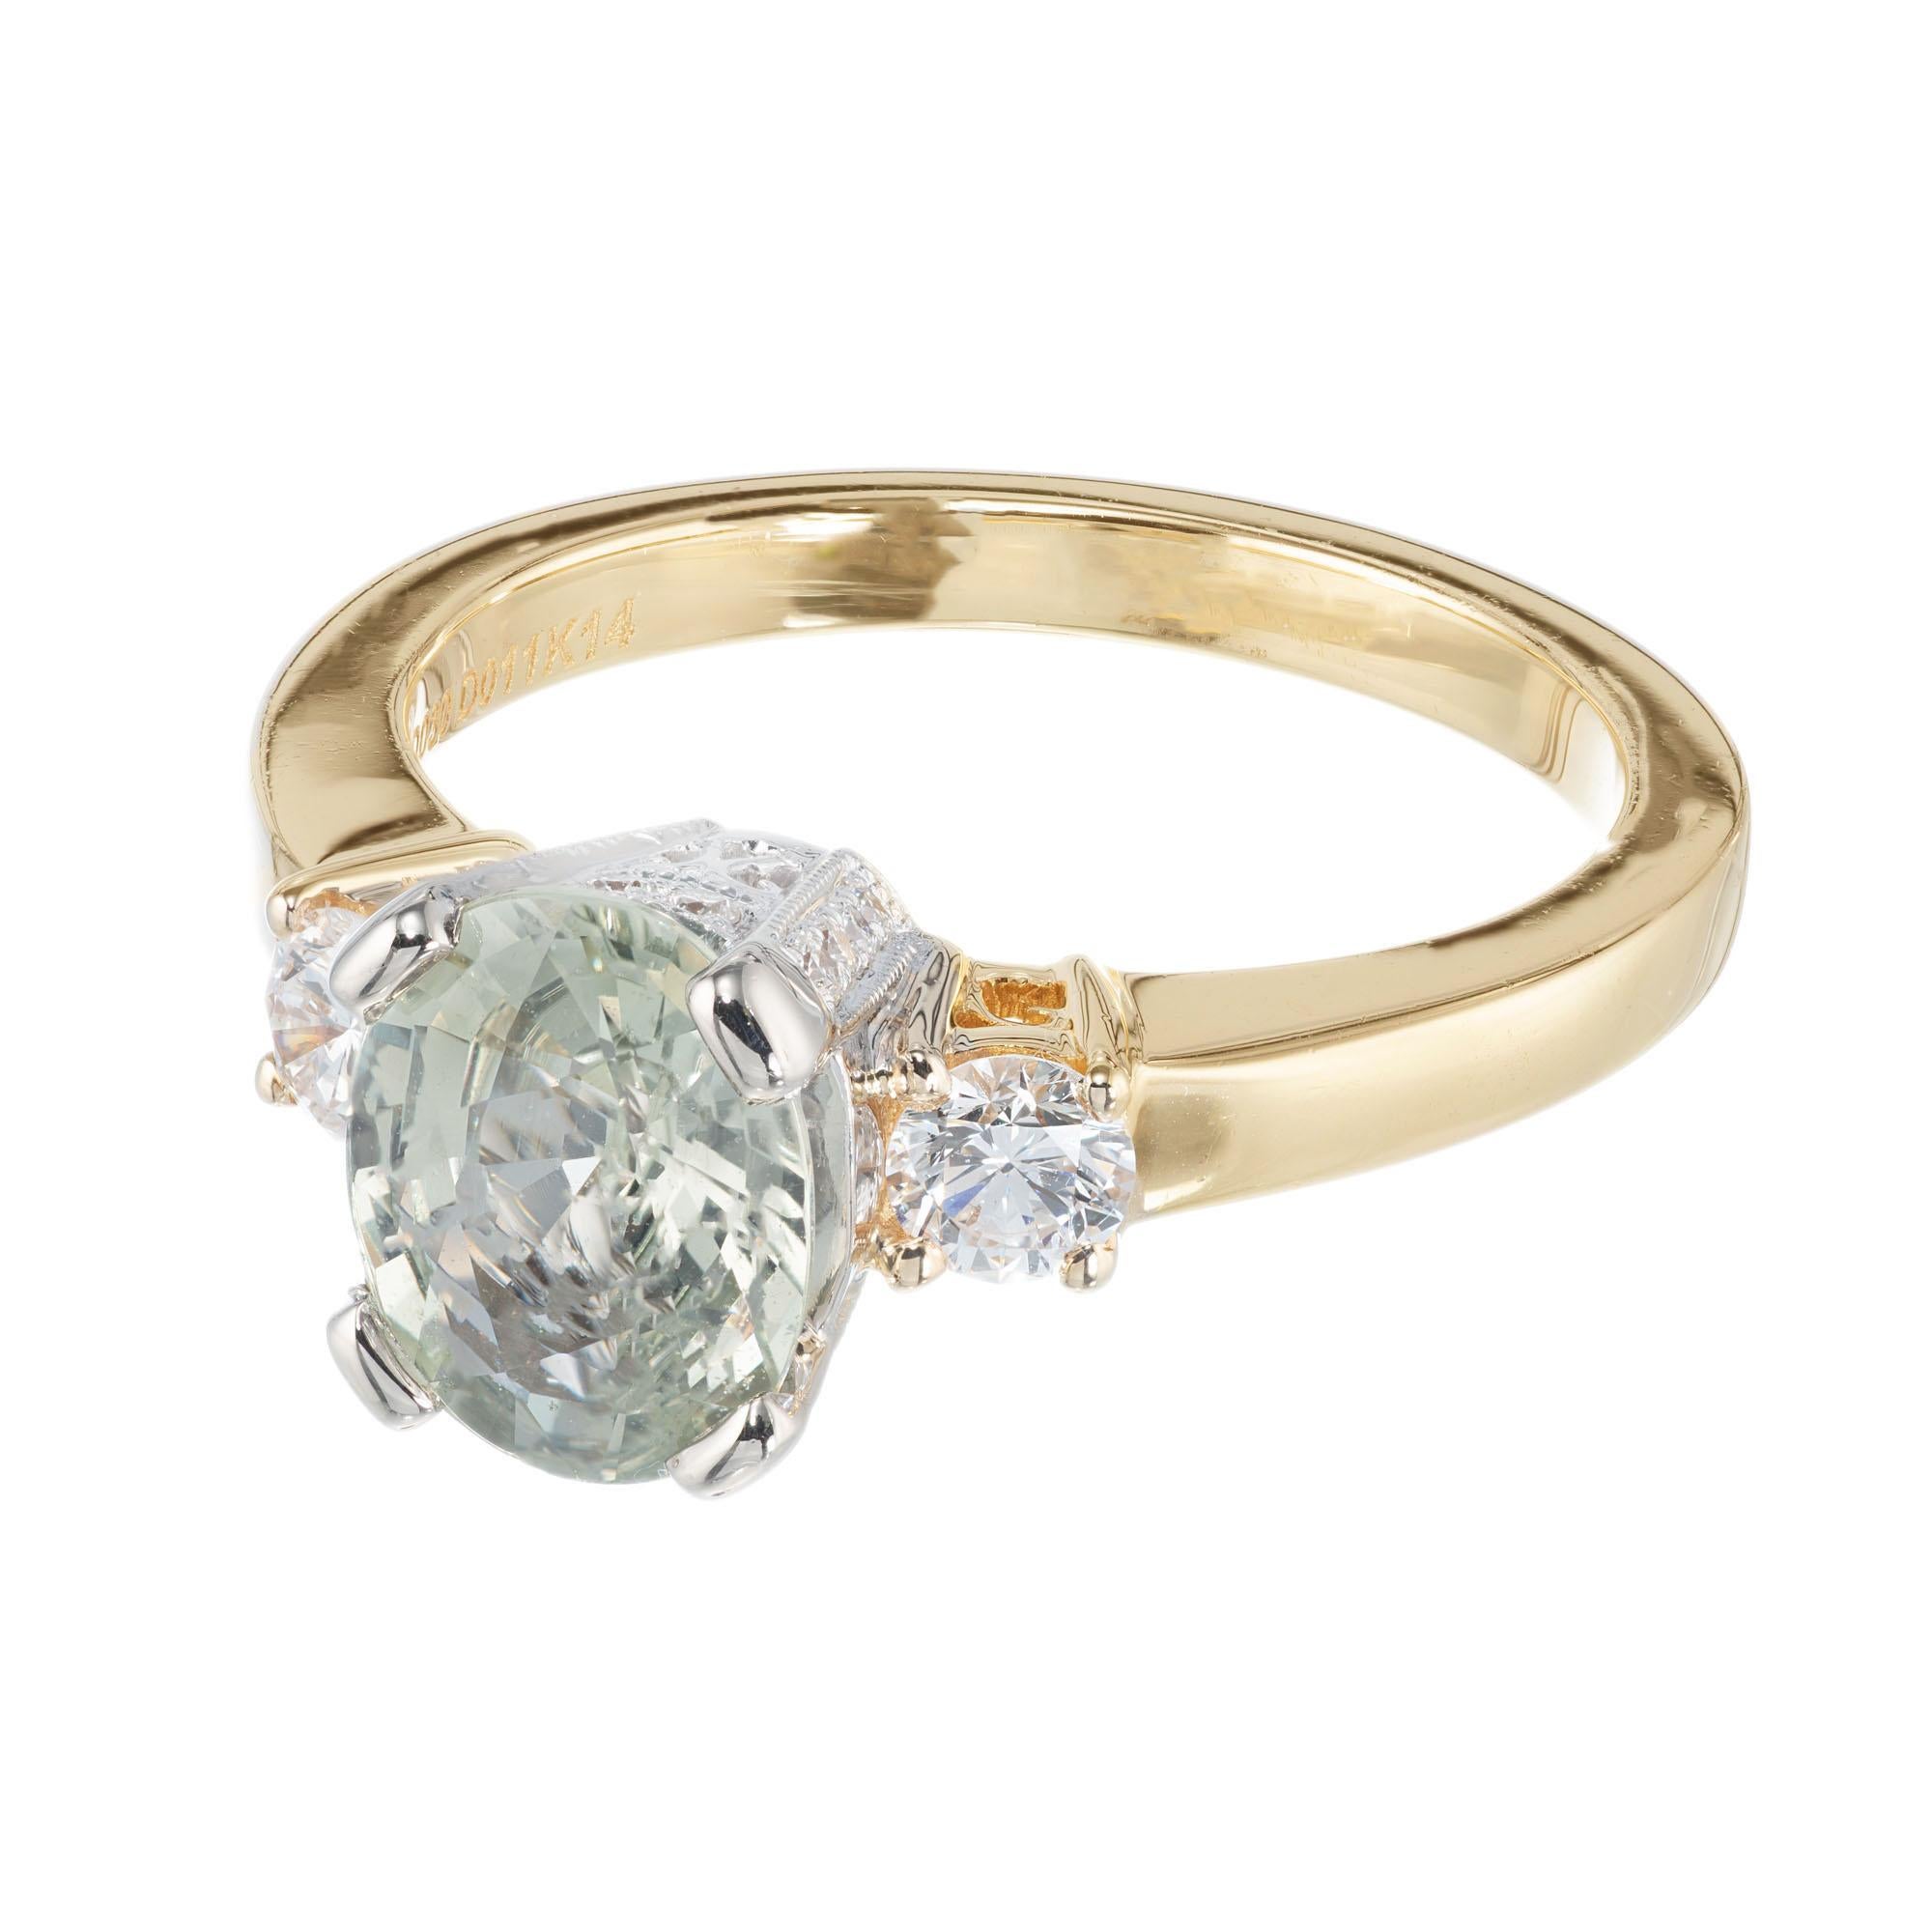 Natural green Sapphire engagement ring with yellow and grey overtones. GIA certified no heat no enhancements. Natalie K designer ring.

1 oval light yellowish green Sapphire, approx. total weight 1.83cts, VS, natural no heat, GIA certificate